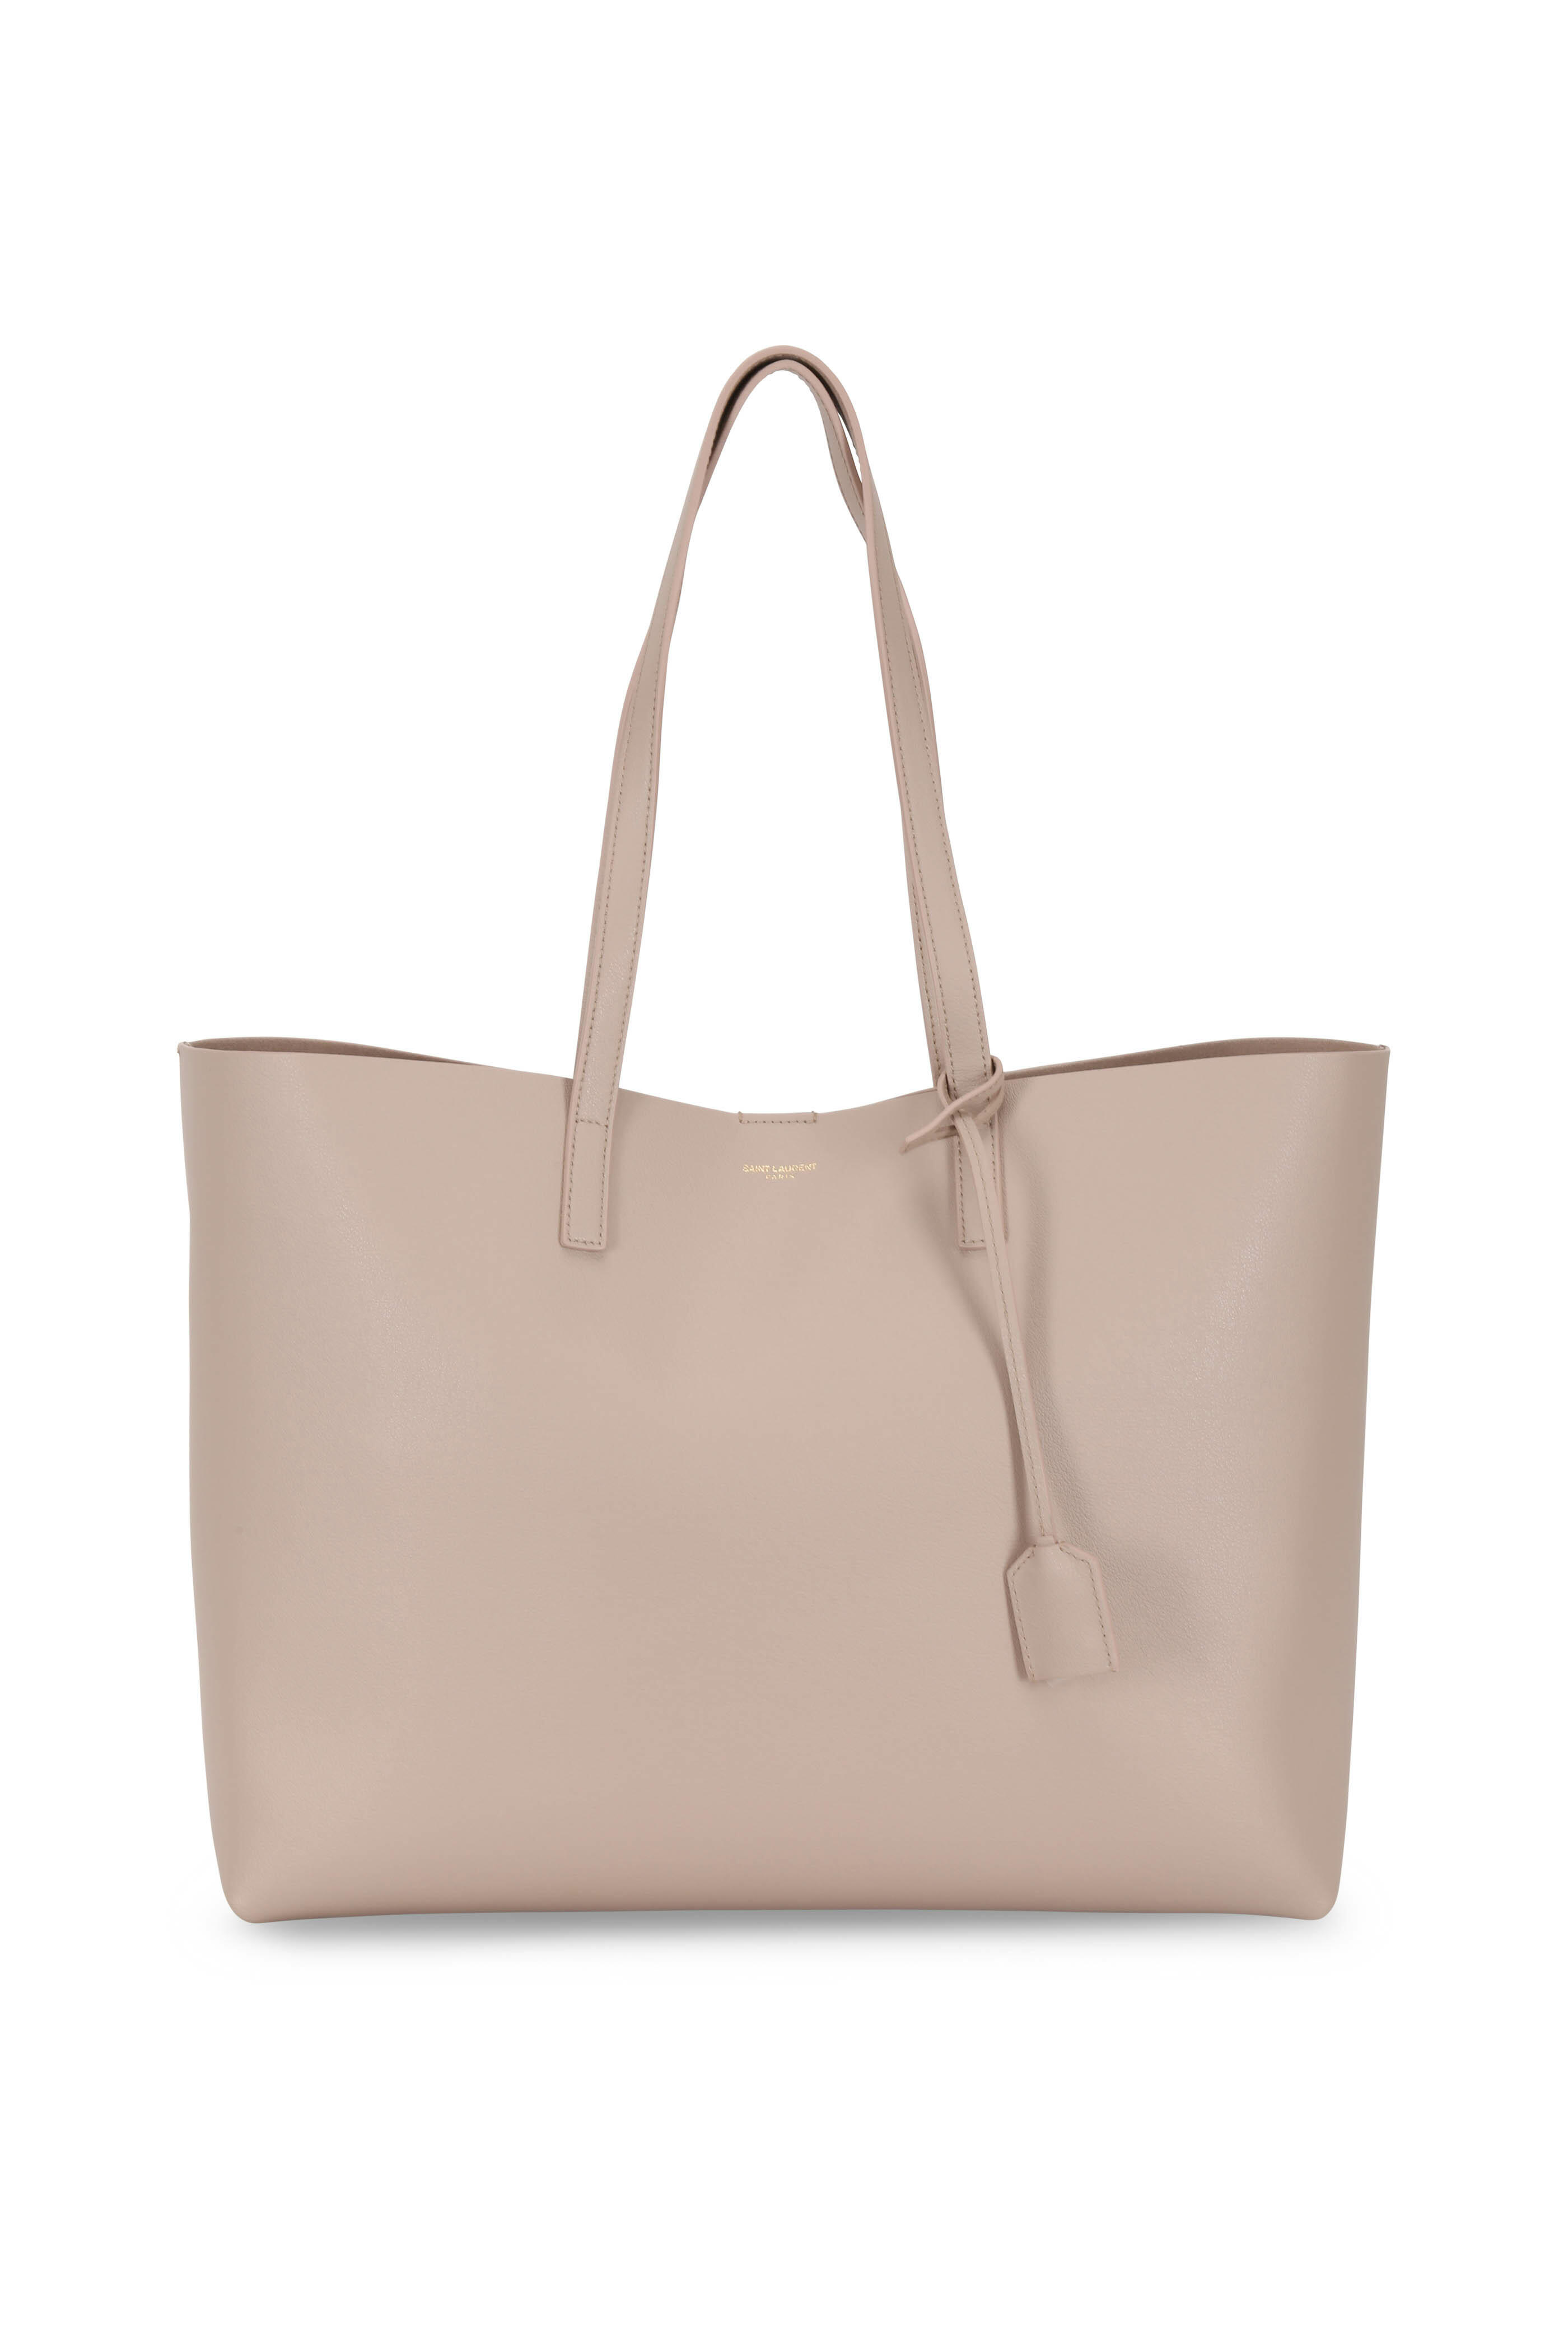 Saint Laurent Shopping Leather Tote Bag in Natural